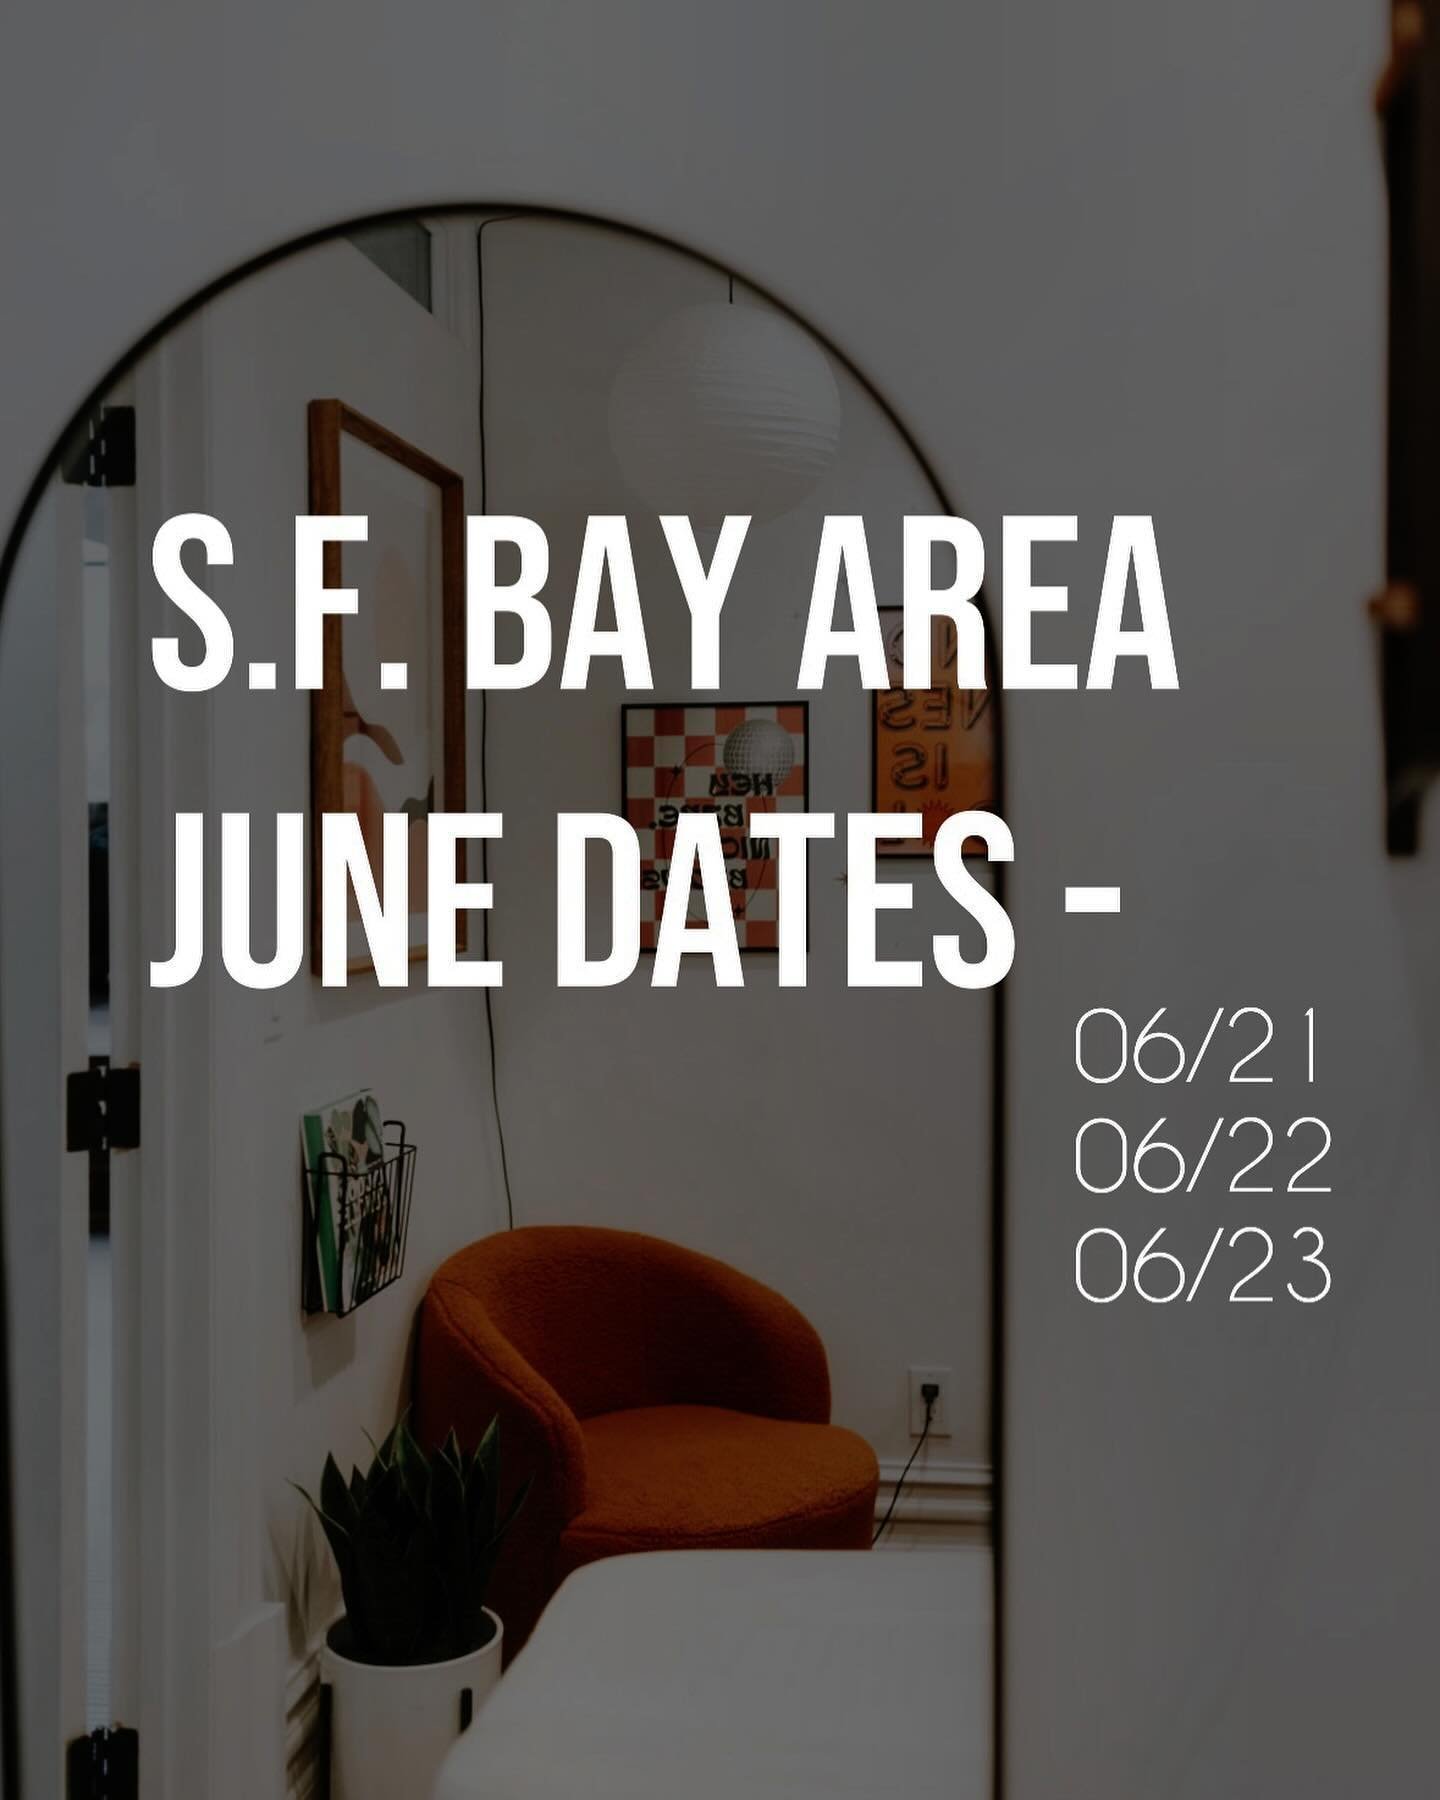 BAY AREA DATES are here and my schedule is open for online booking! I can&rsquo;t wait to see you soon! 

To schedule your cosmetic tattoos online, select the link in my bio. You can also find my tattoo request form for all small, fine-line and micro